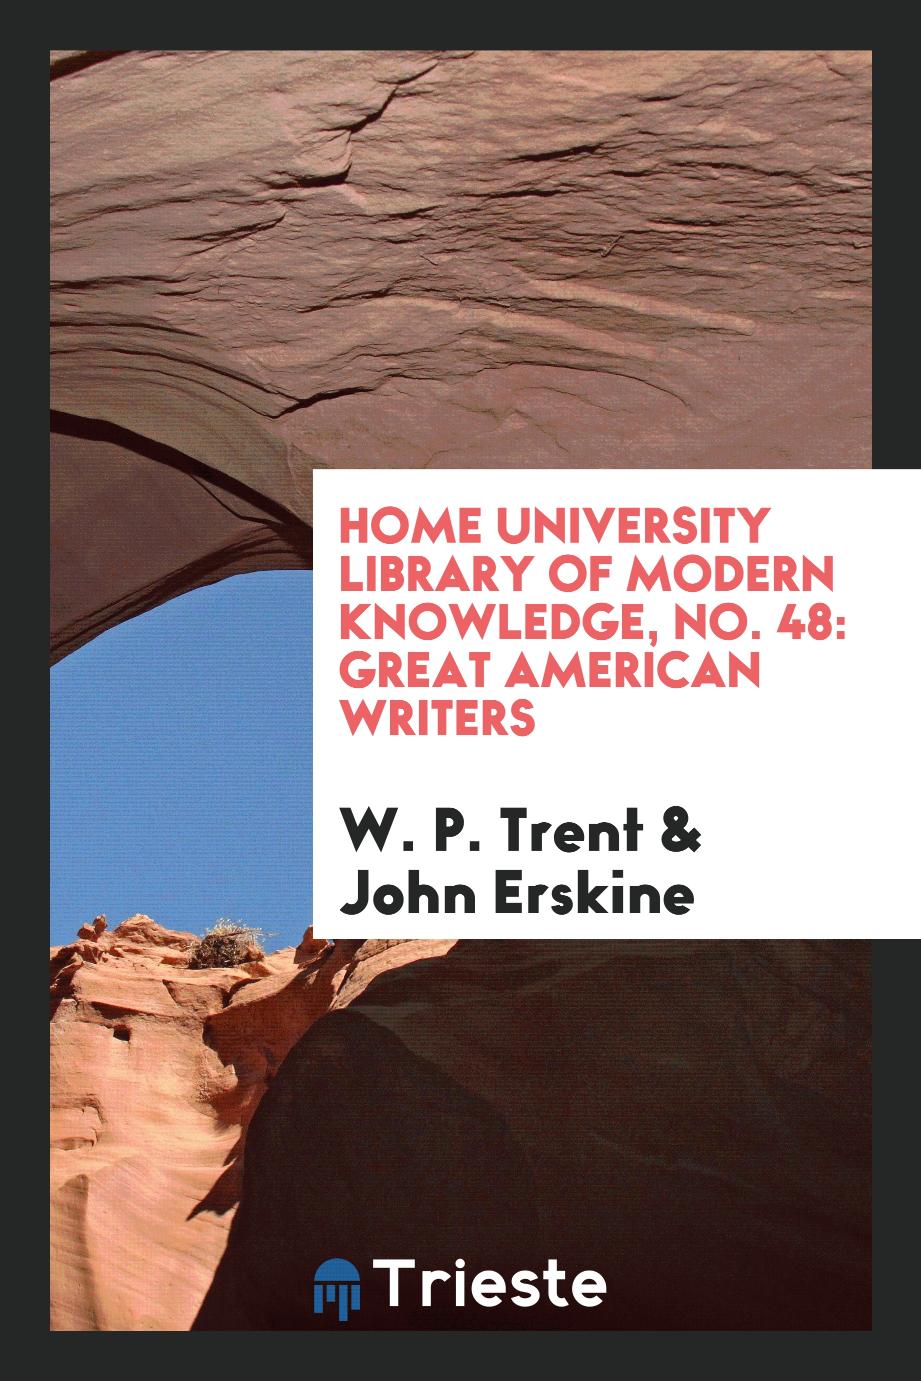 Home University Library of Modern Knowledge, No. 48: Great American writers